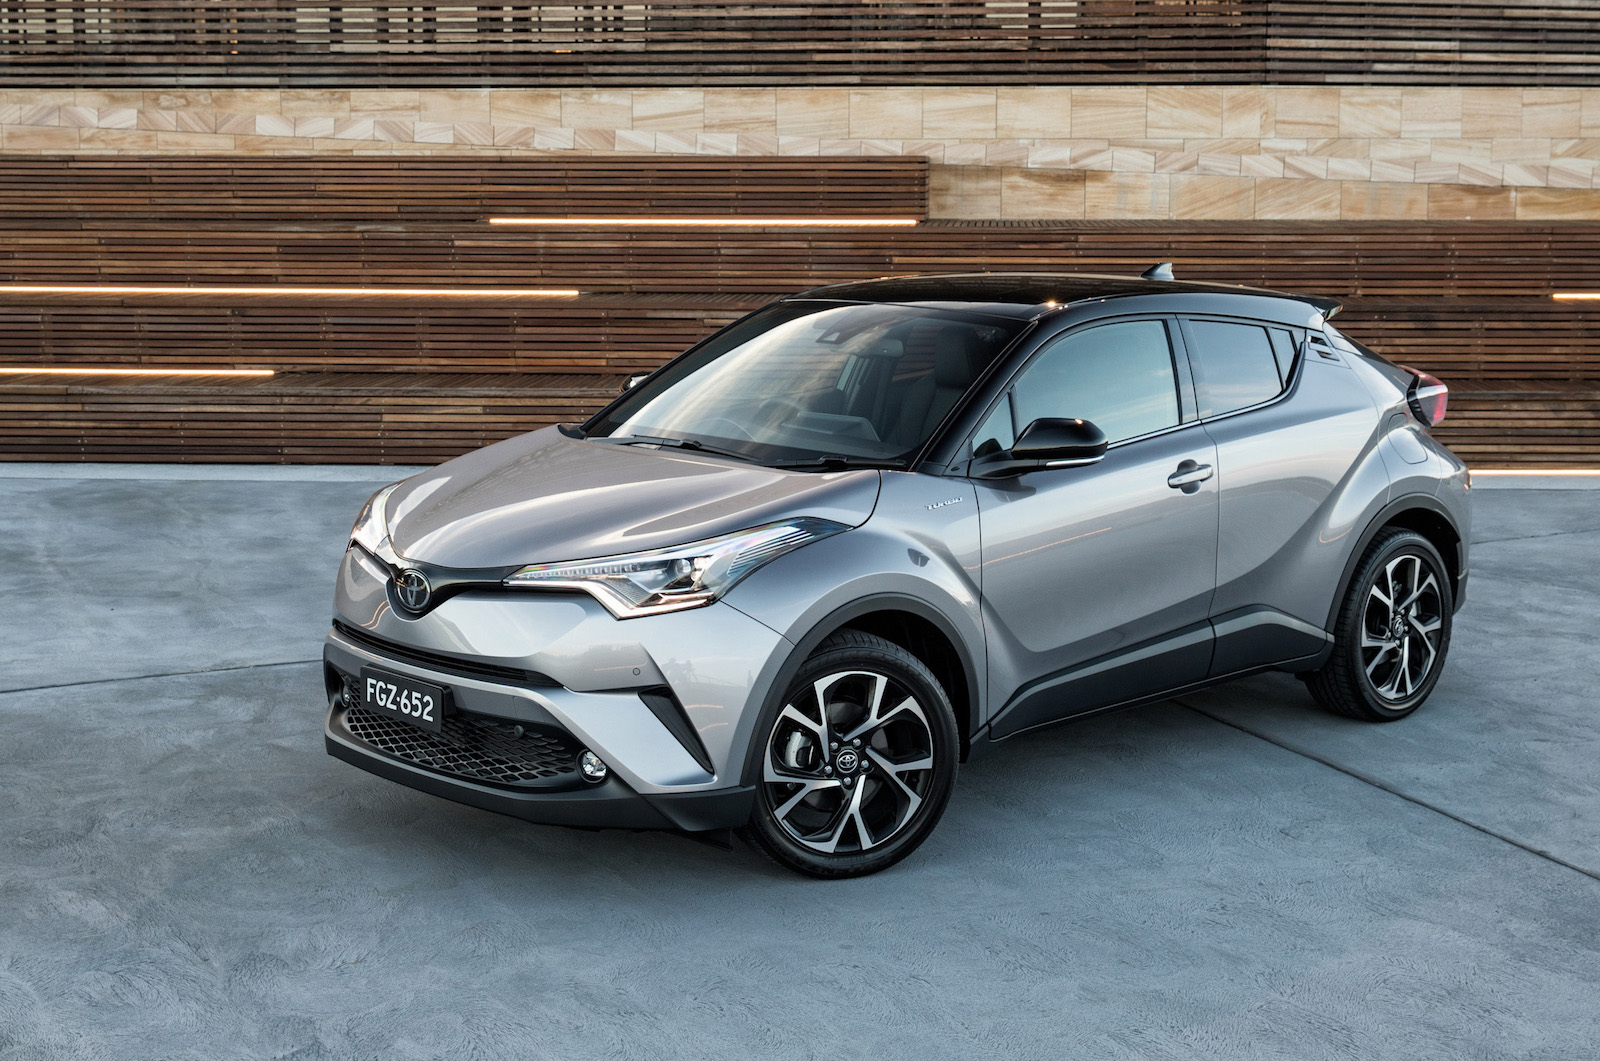 All-new Toyota C-HR now on sale in Australia from $26,990